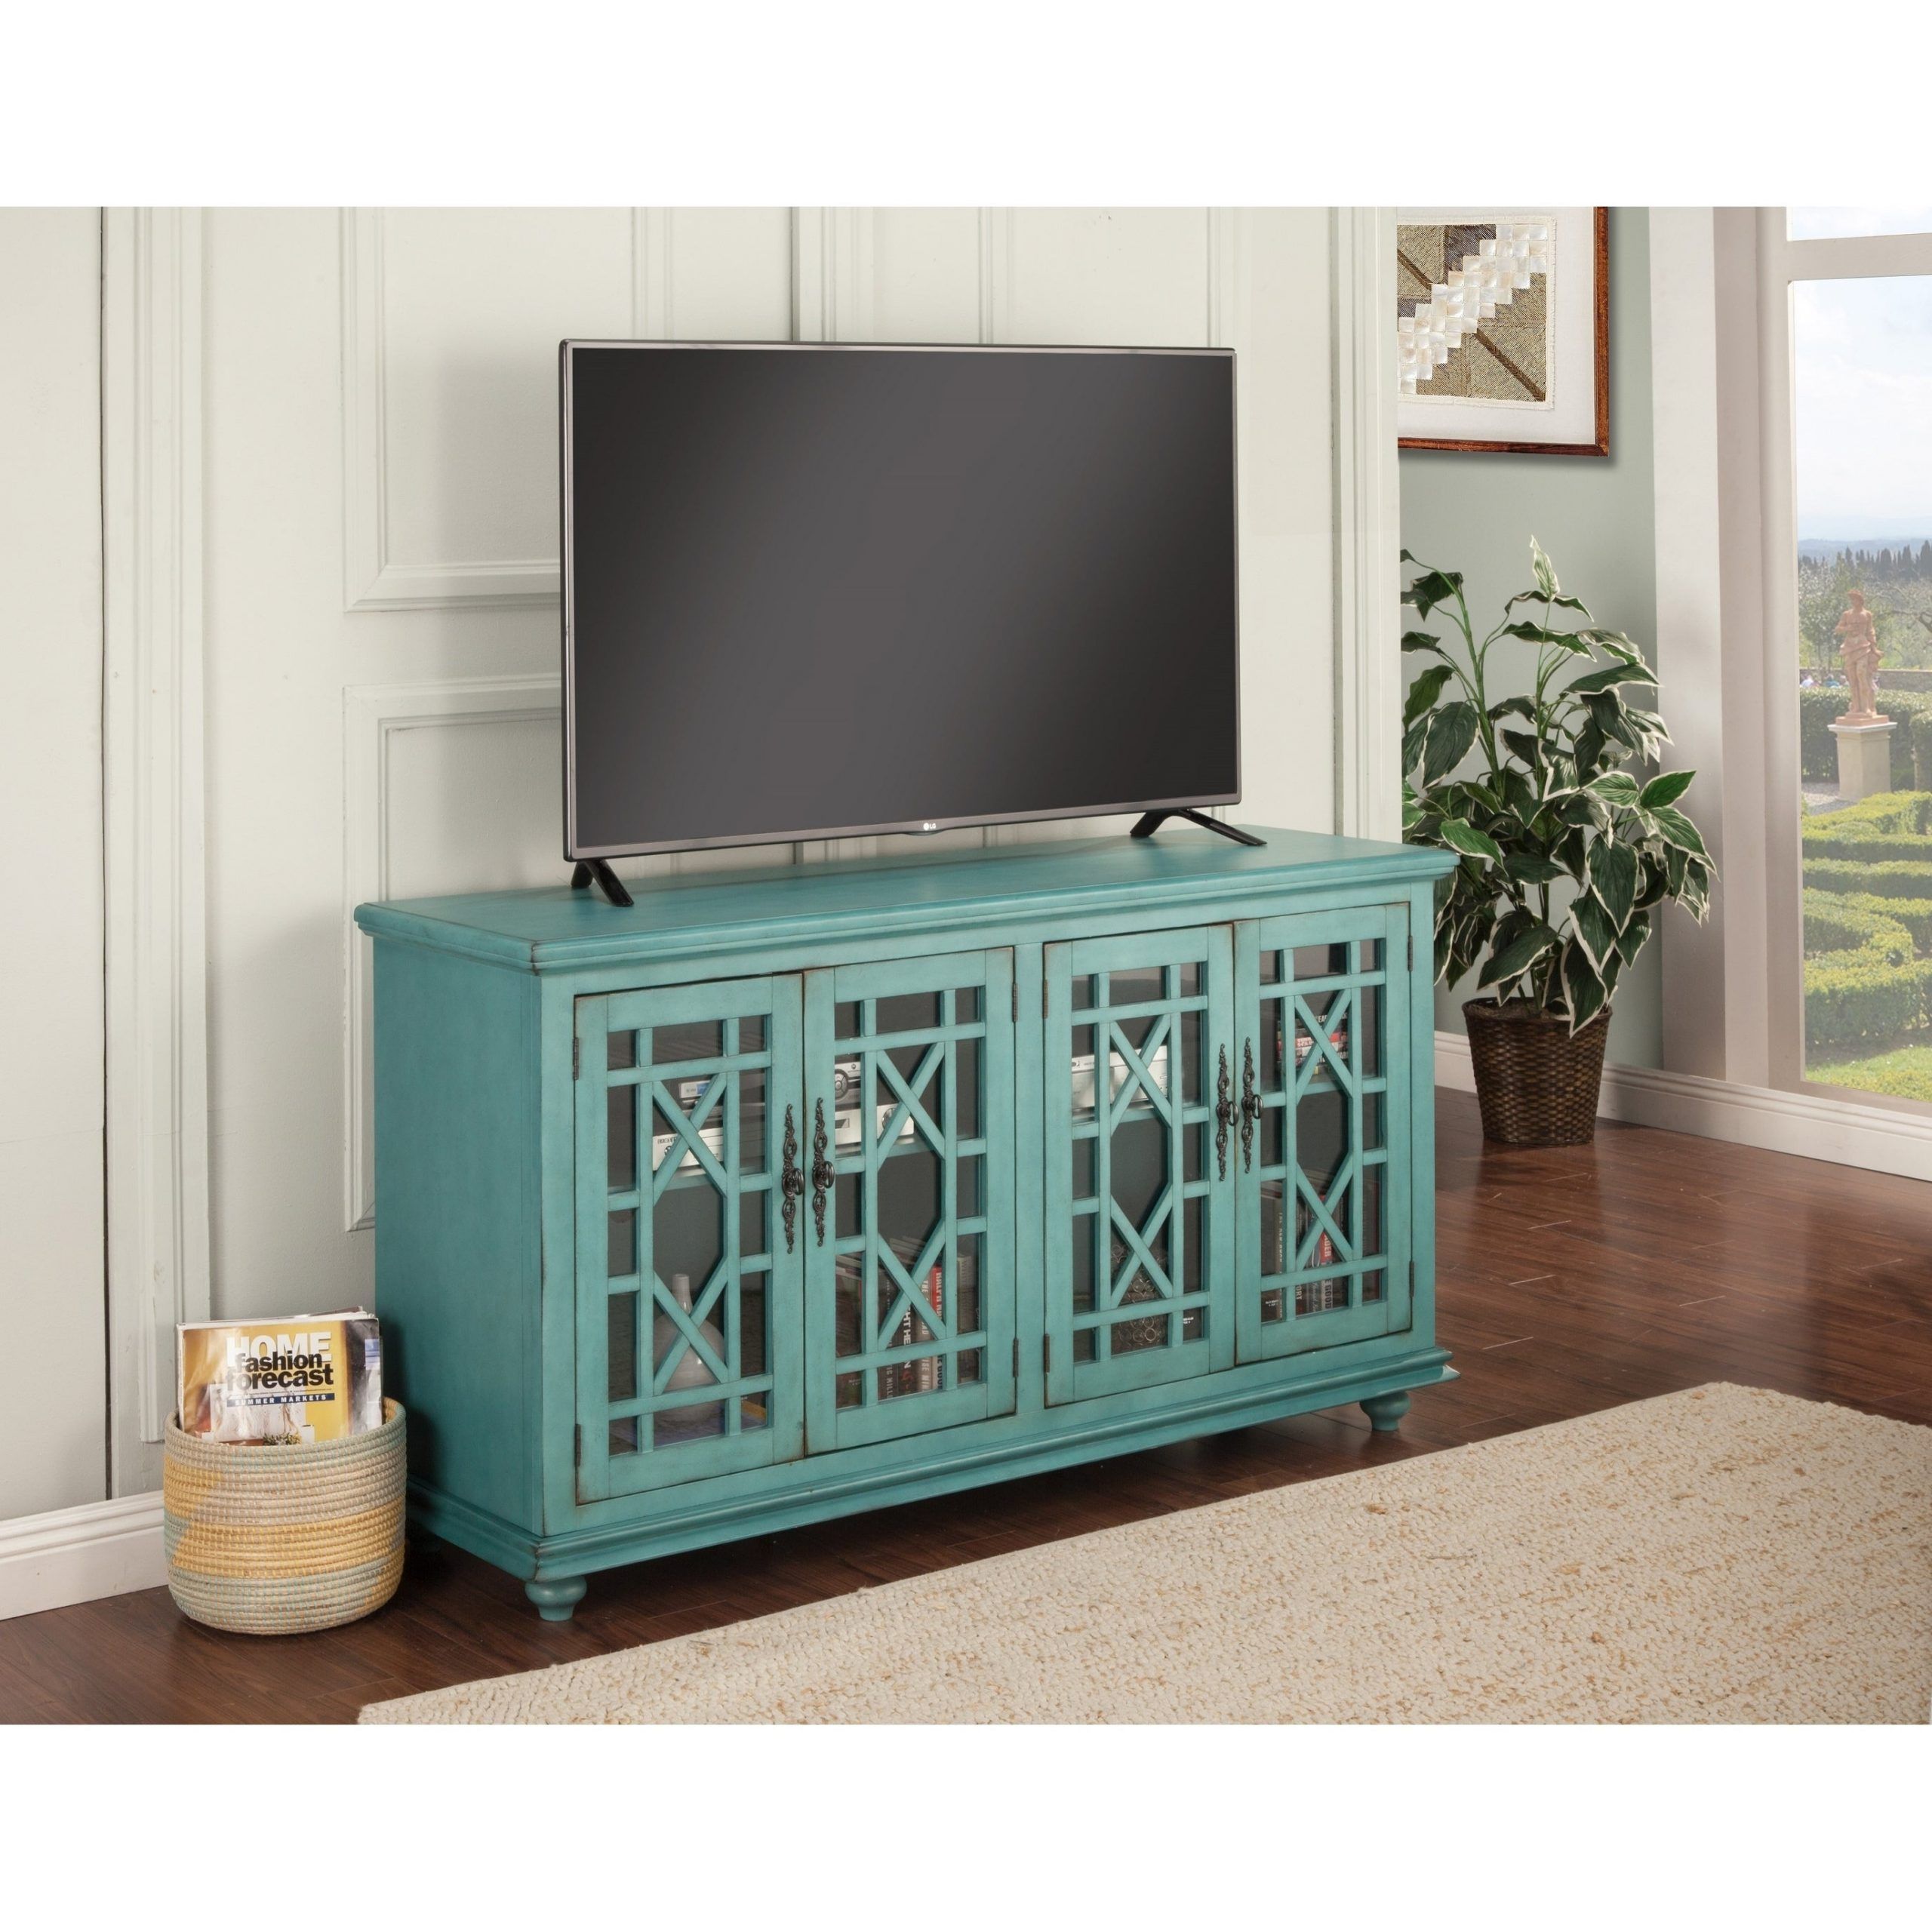 Shop Martin Svensson Home Elegant Collection 63" Tv Stand Intended For Glass Front Tv Stands (View 6 of 15)